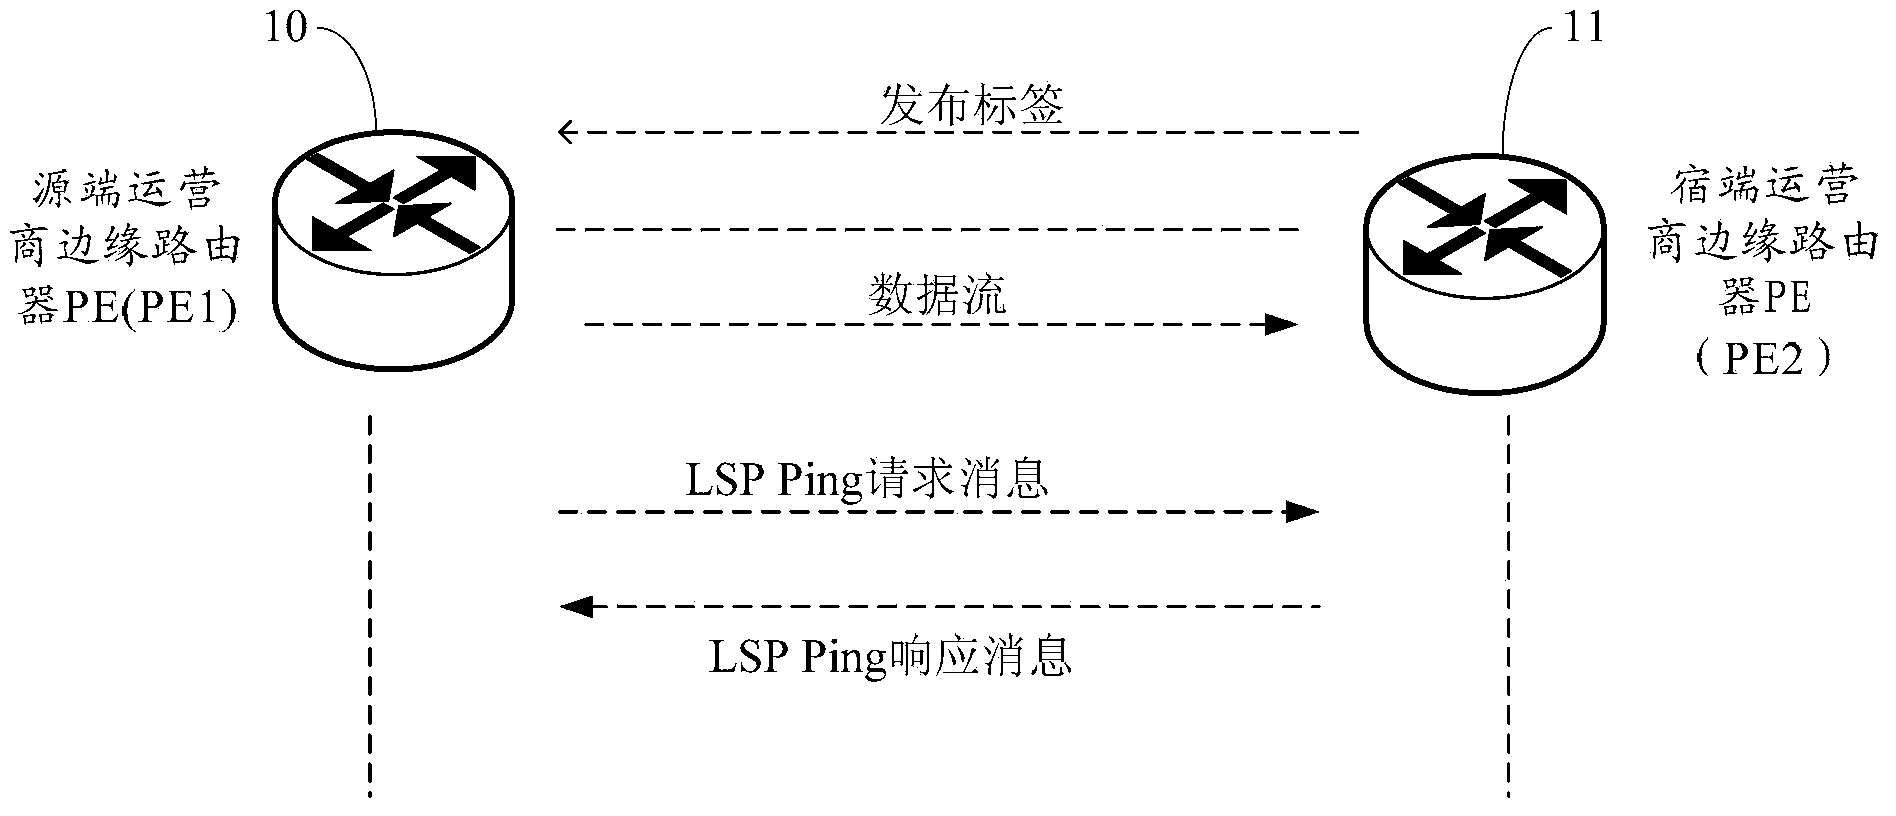 Method, device and system for operation, administration and maintenance (OAM) configuration